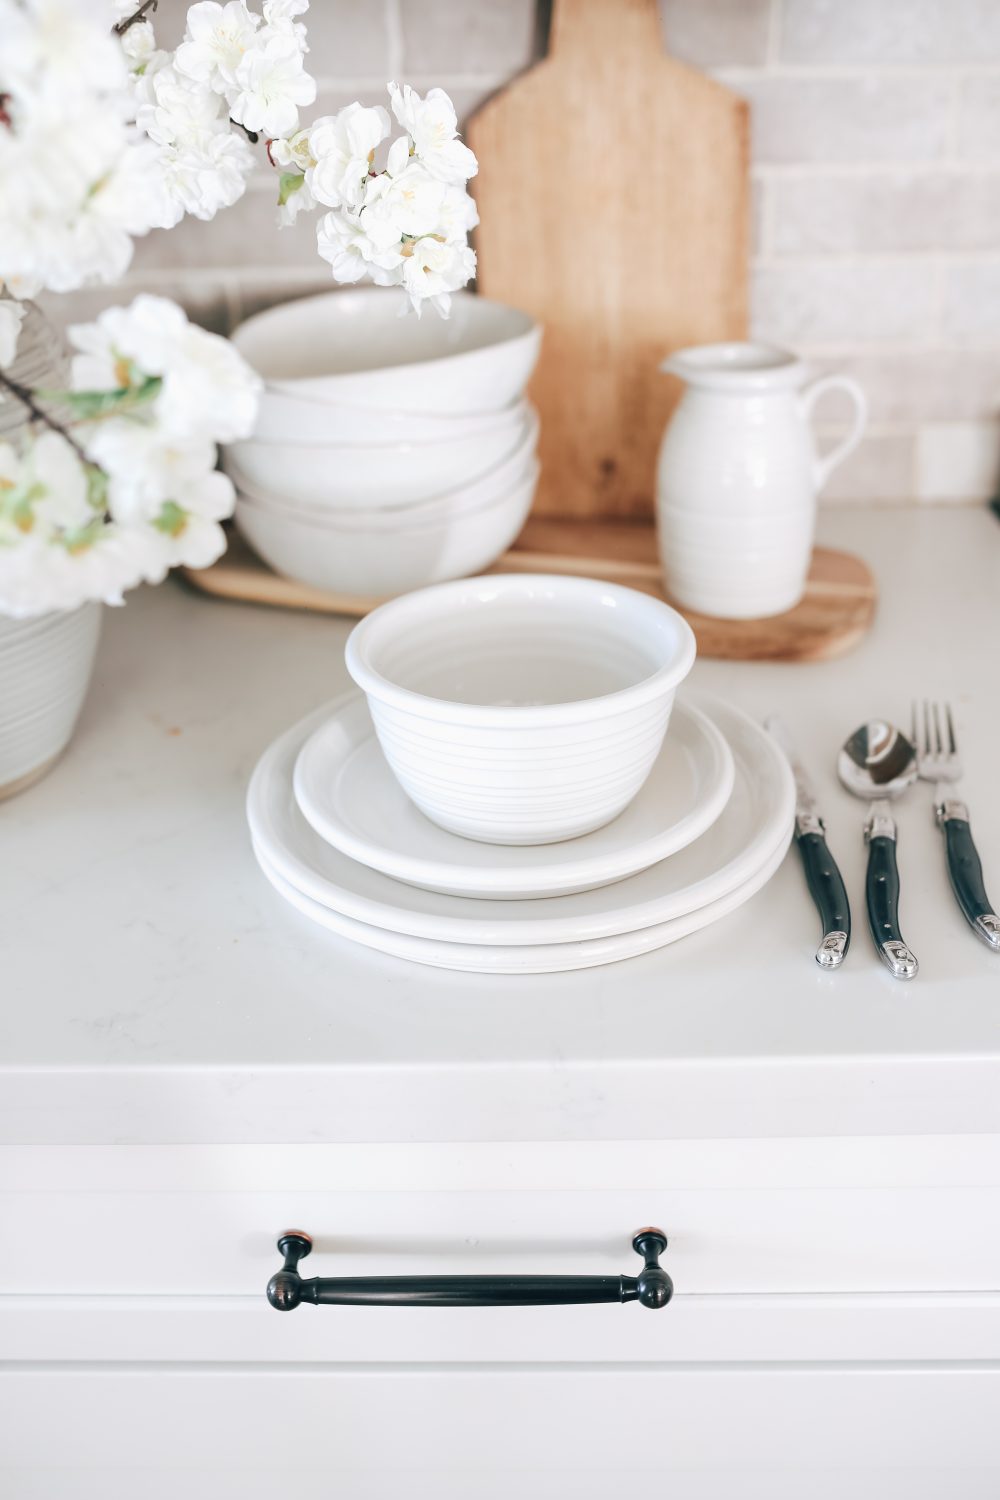 Best Crate and Barrel Dishes for Everyday Use 